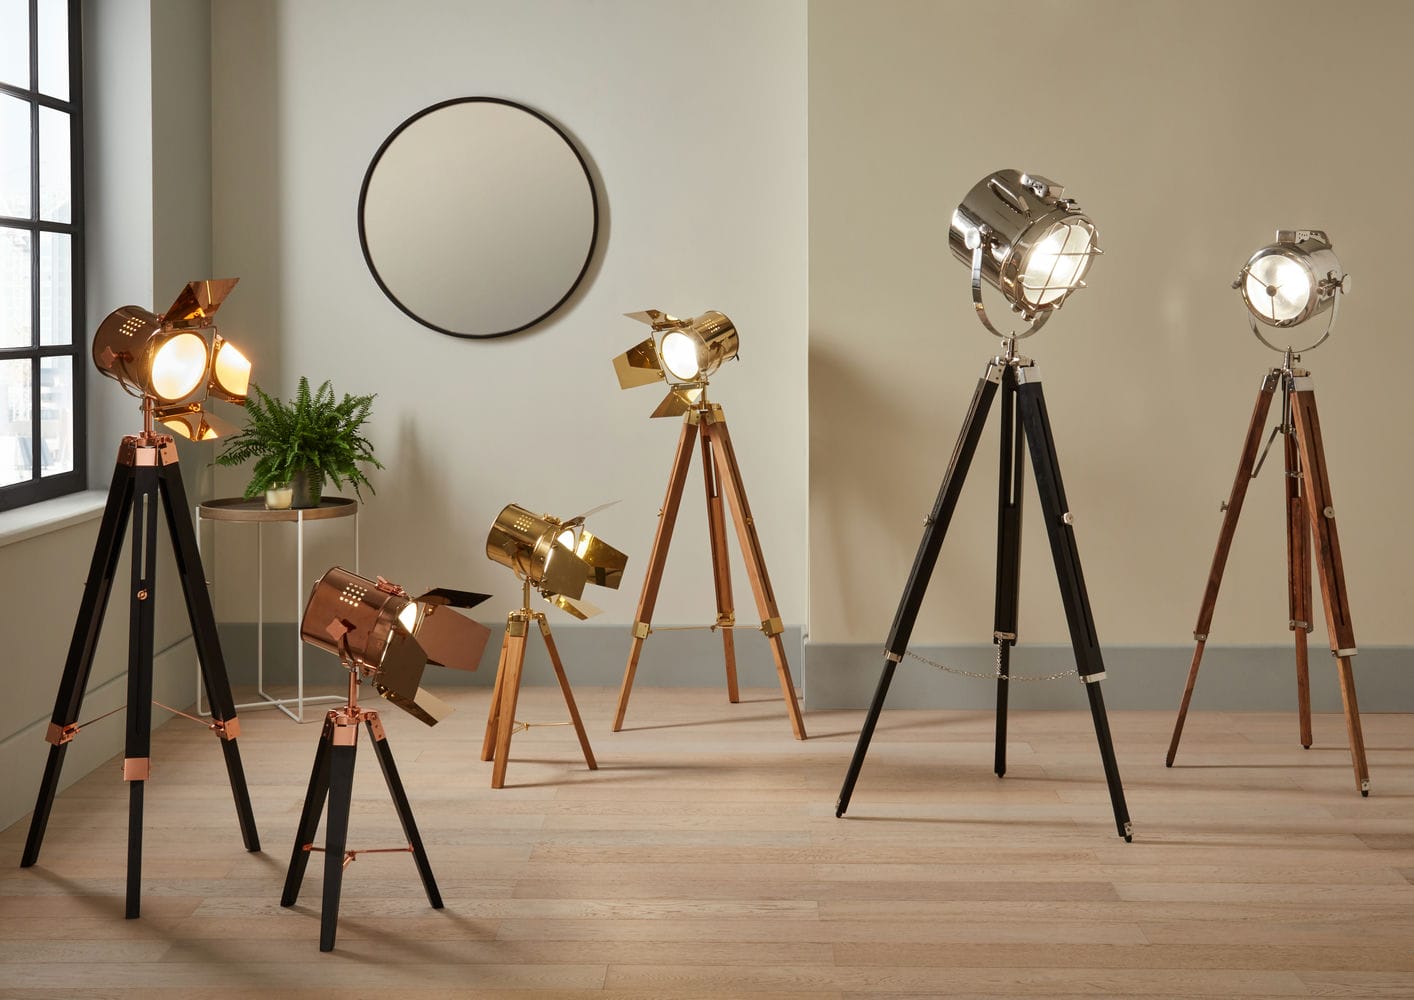 Hereford Gold and Natural Tripod Floor Lamp